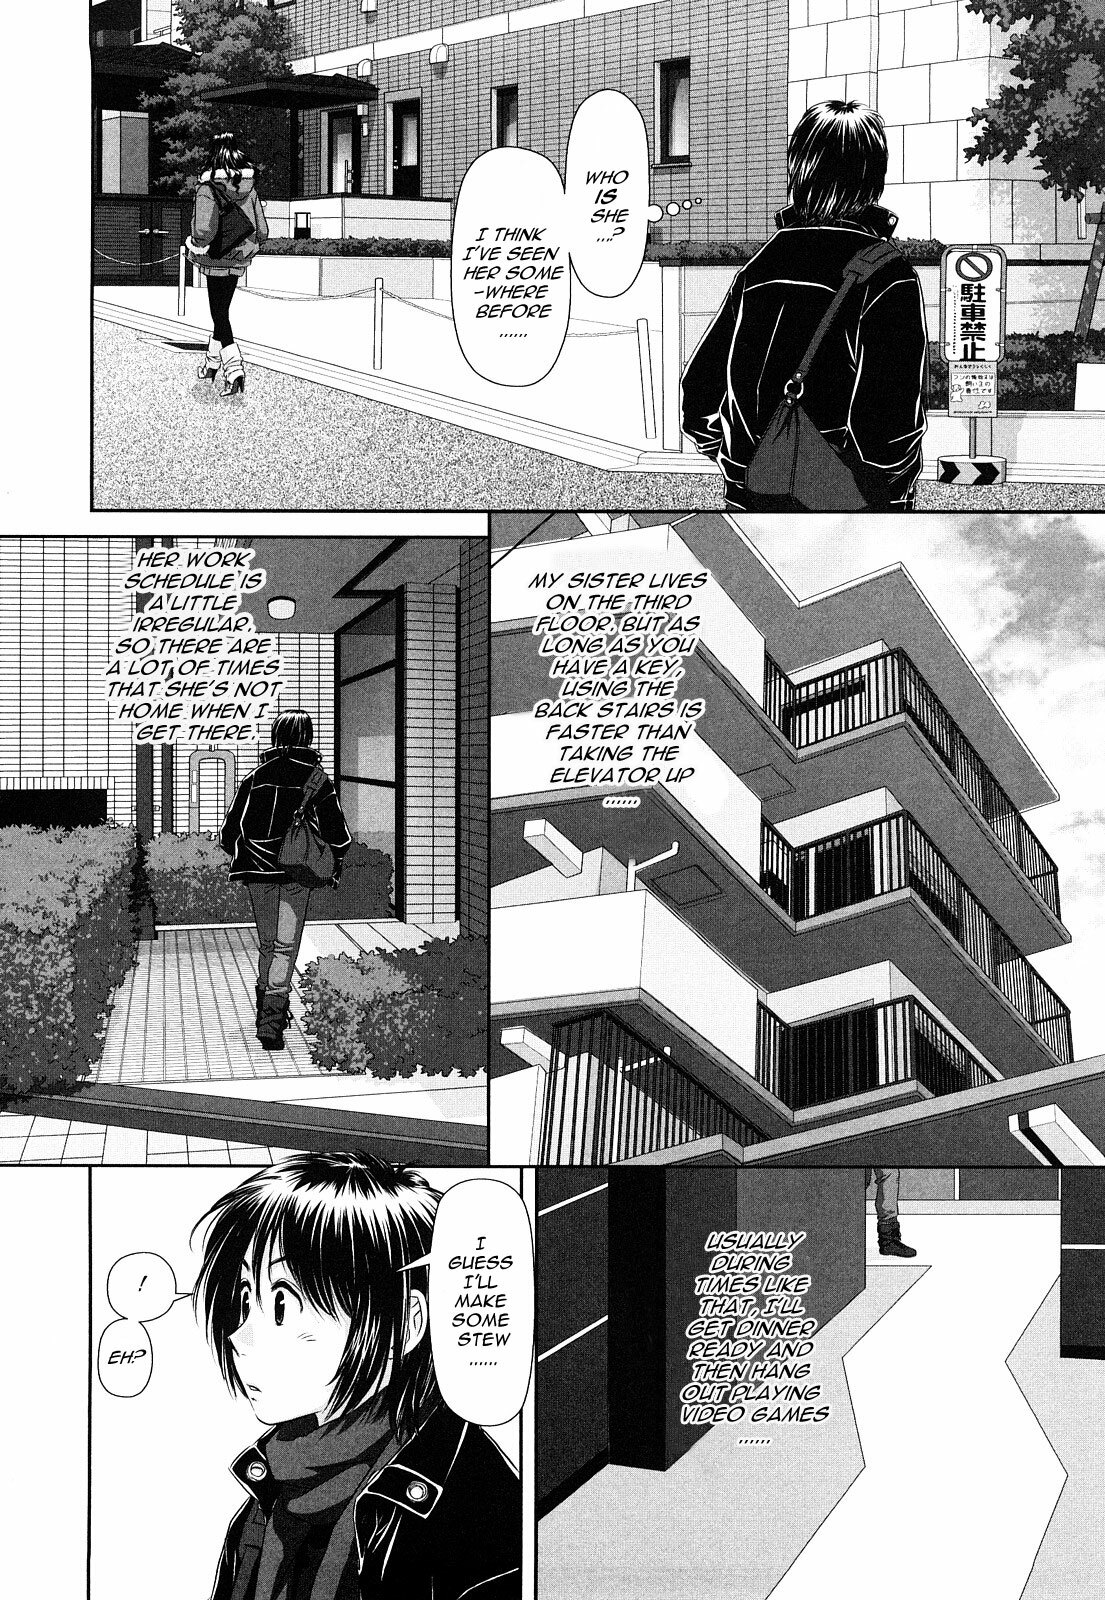 [Yui Toshiki] My Sisters Ch.01-04, 07 (Ch.01-03 Decensored) [English] page 22 full